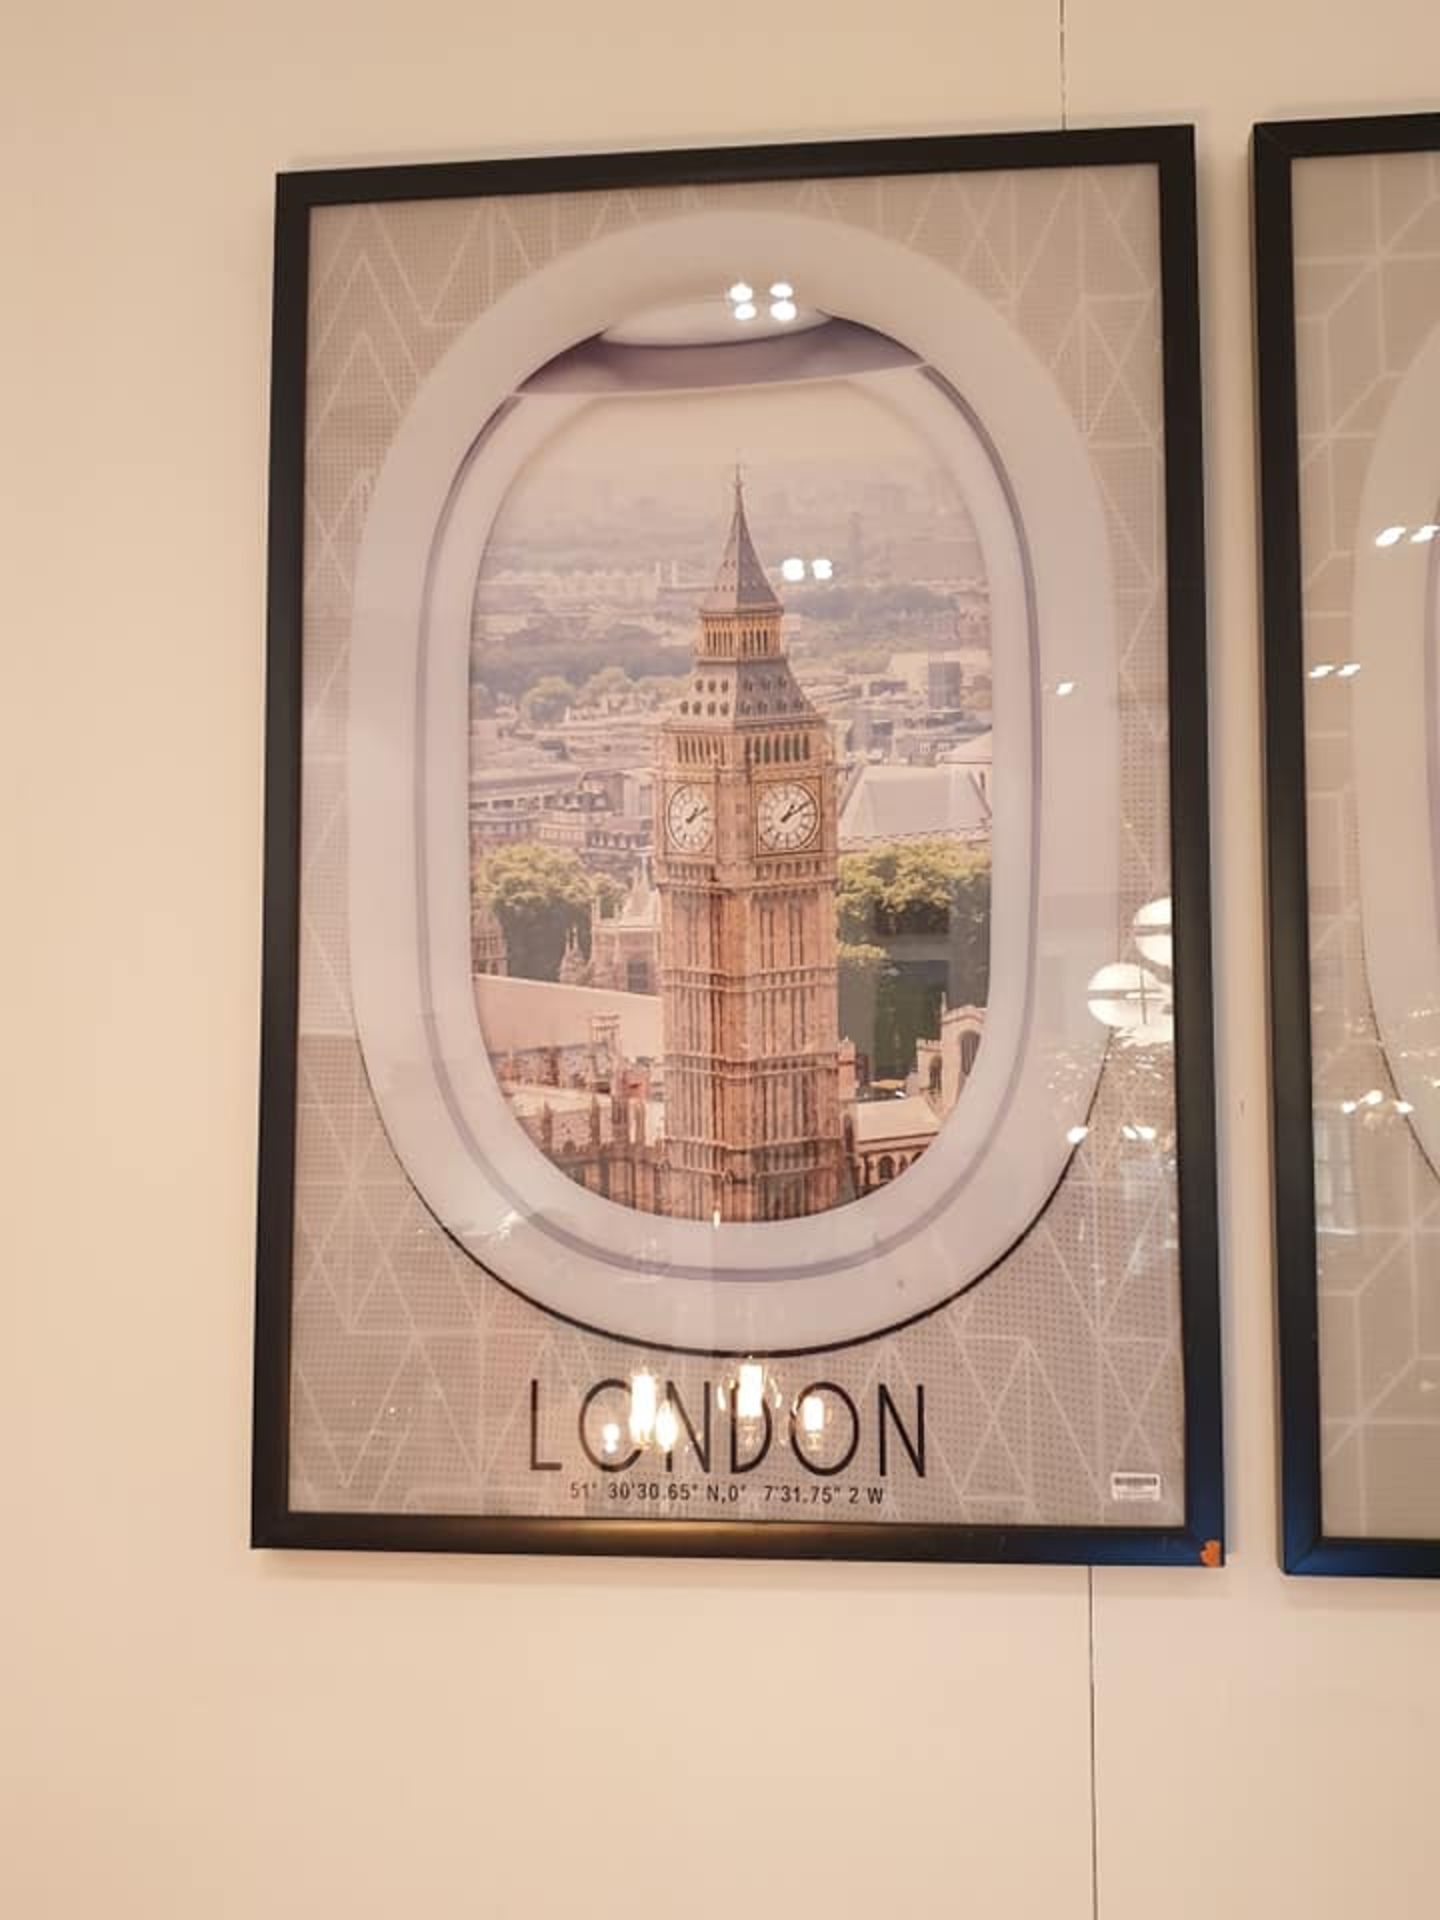 Framed Wall Art “ A View Of London” A View Of London From Airplane Window Printed 80 X 120cm